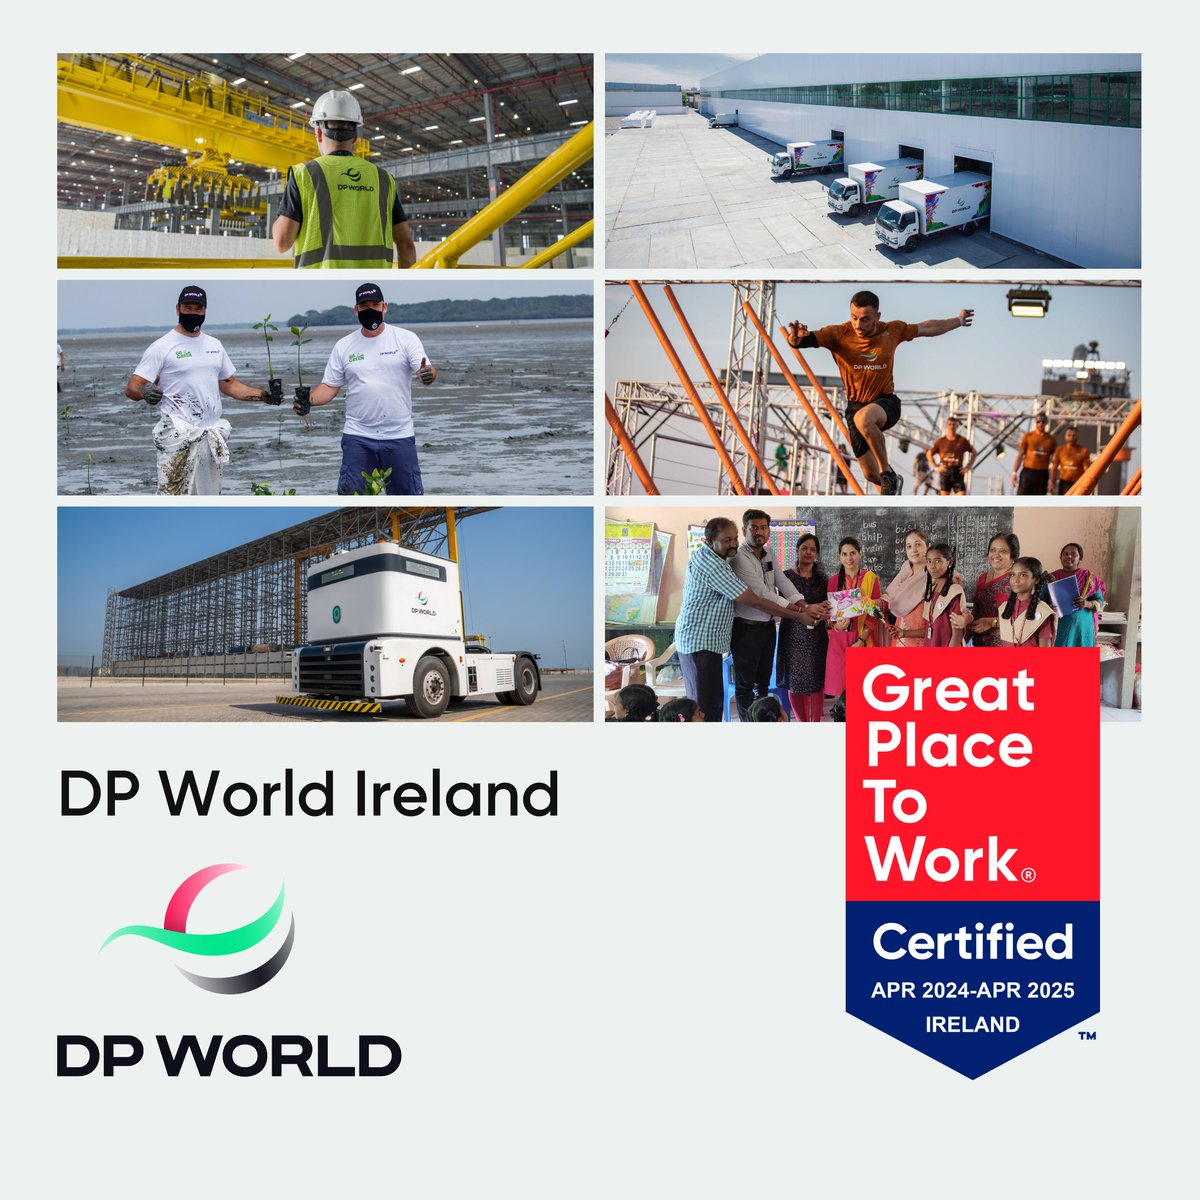 CERTIFICATION 🏅| We are delighted to Certify™ DP World Ireland (@DPWorldTour) as a #greatplacetowork! Well done to the team for this fantastic achievement! 🎉 Check out all the Certified™ organisations 👉 hubs.ly/Q02xxj9h0 #gptw